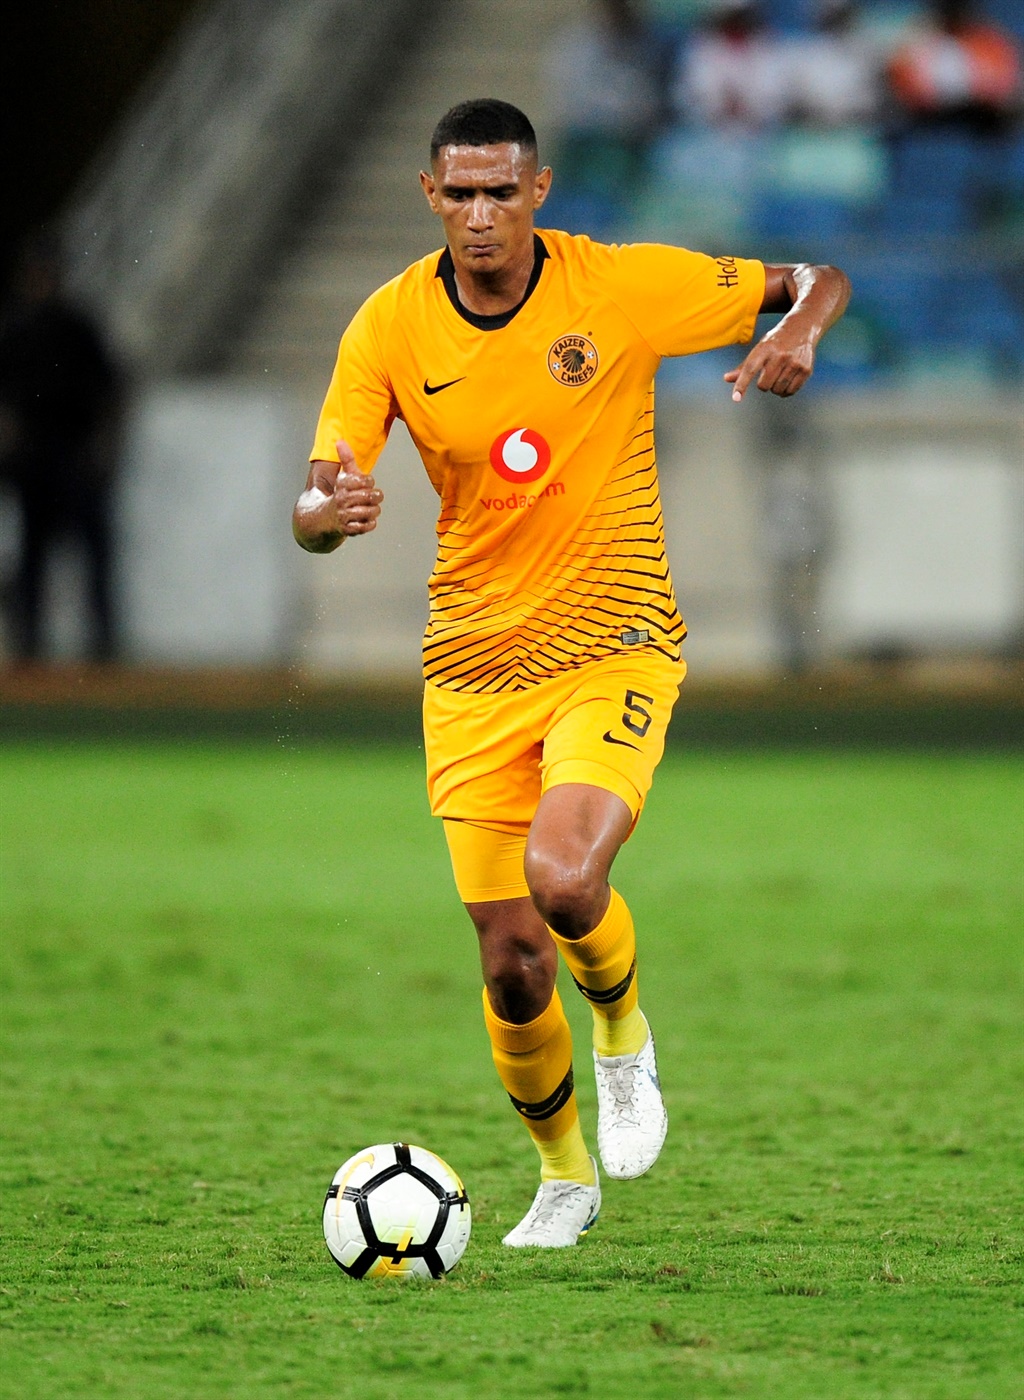 Mario Booysen of Kaizer Chiefs FC during the CAF Confederations Cup 2018/19 game between Kaizer Chiefs and Elgeco Plus at Moses Mabhida Stadium, Durban on 15 December 2018